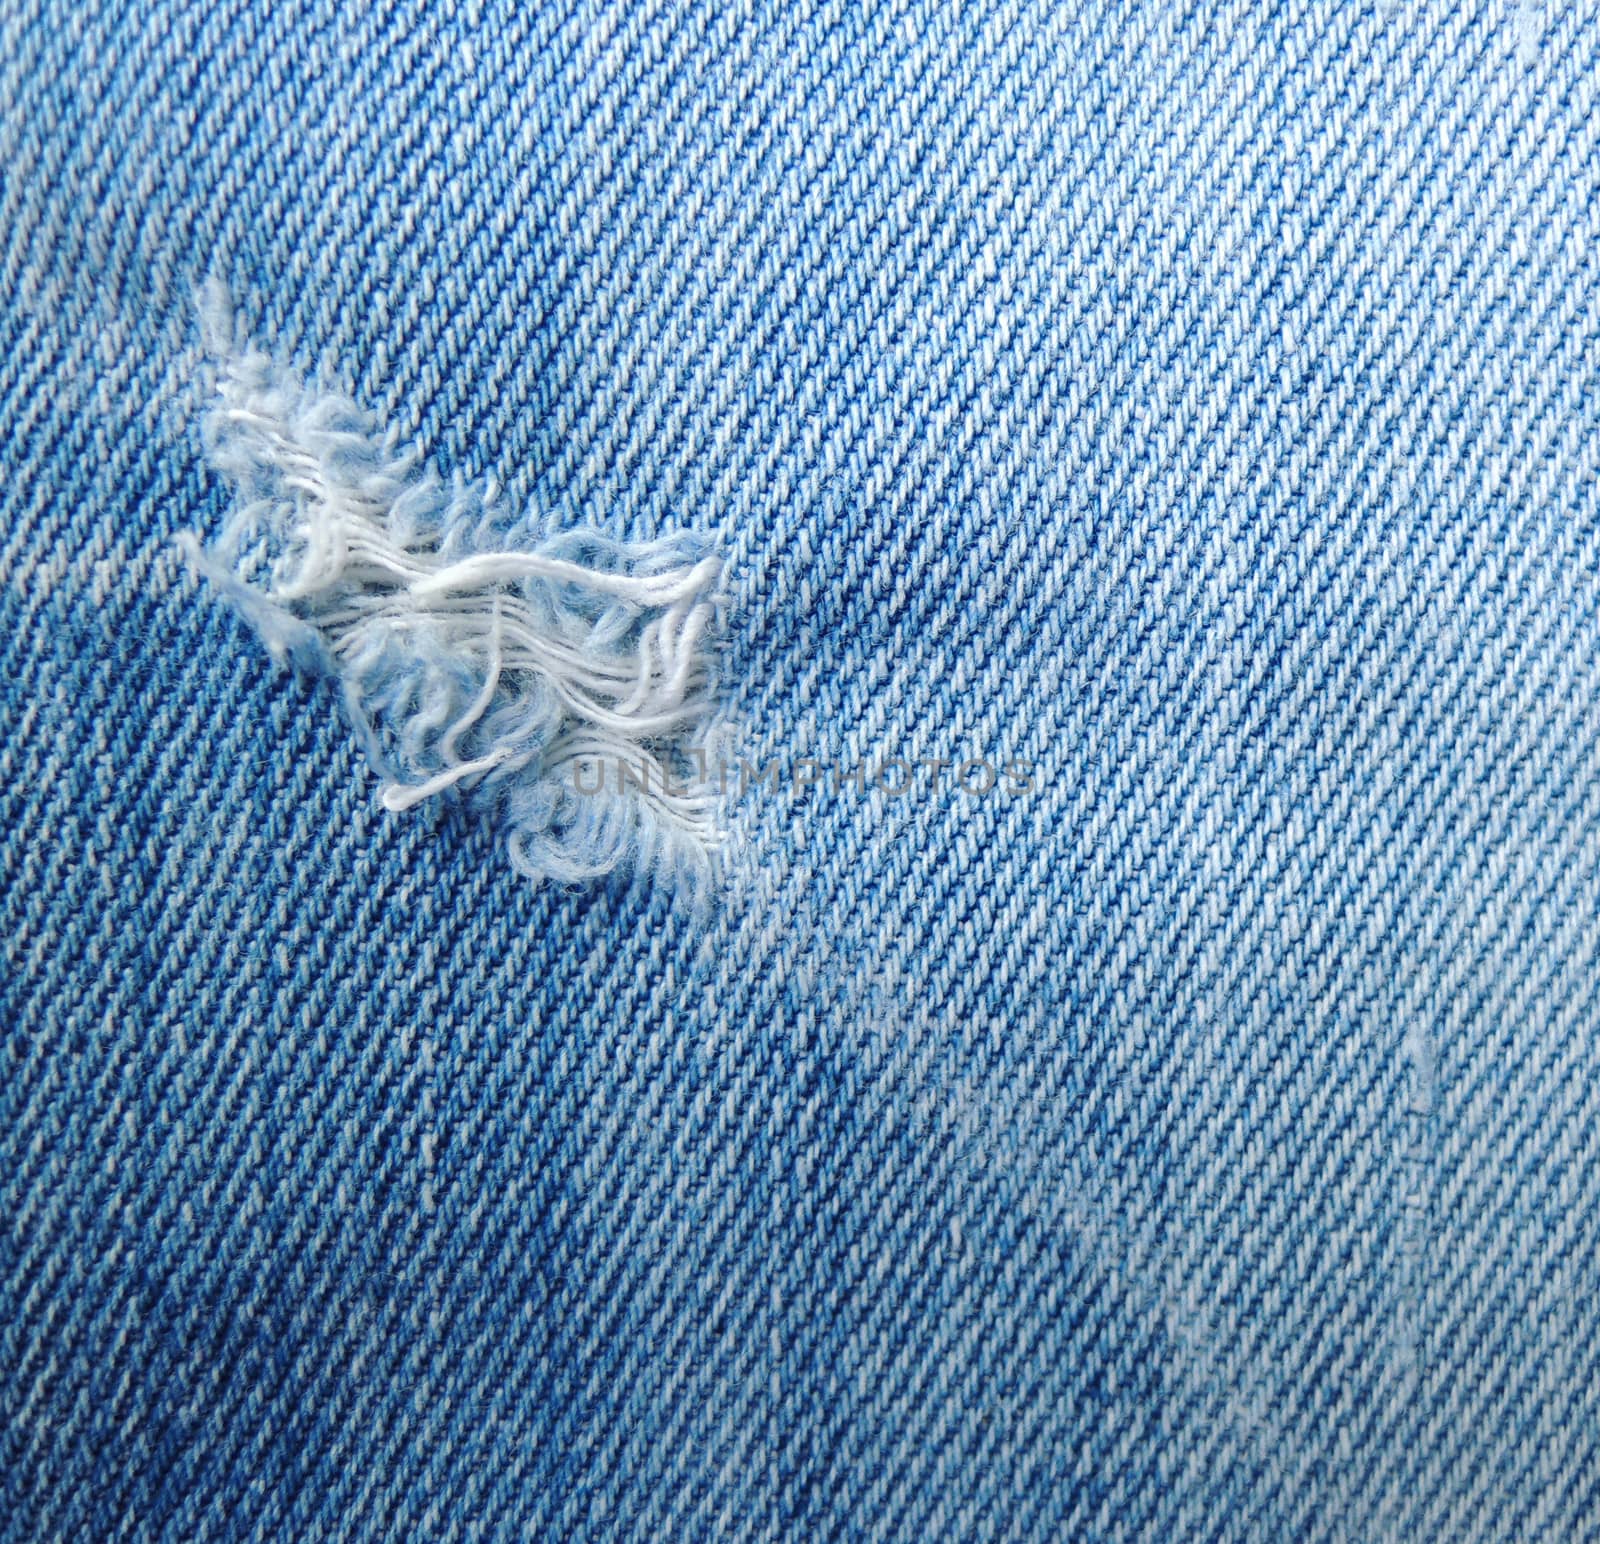 blue jean texture with a hole and threads showing by MalyDesigner